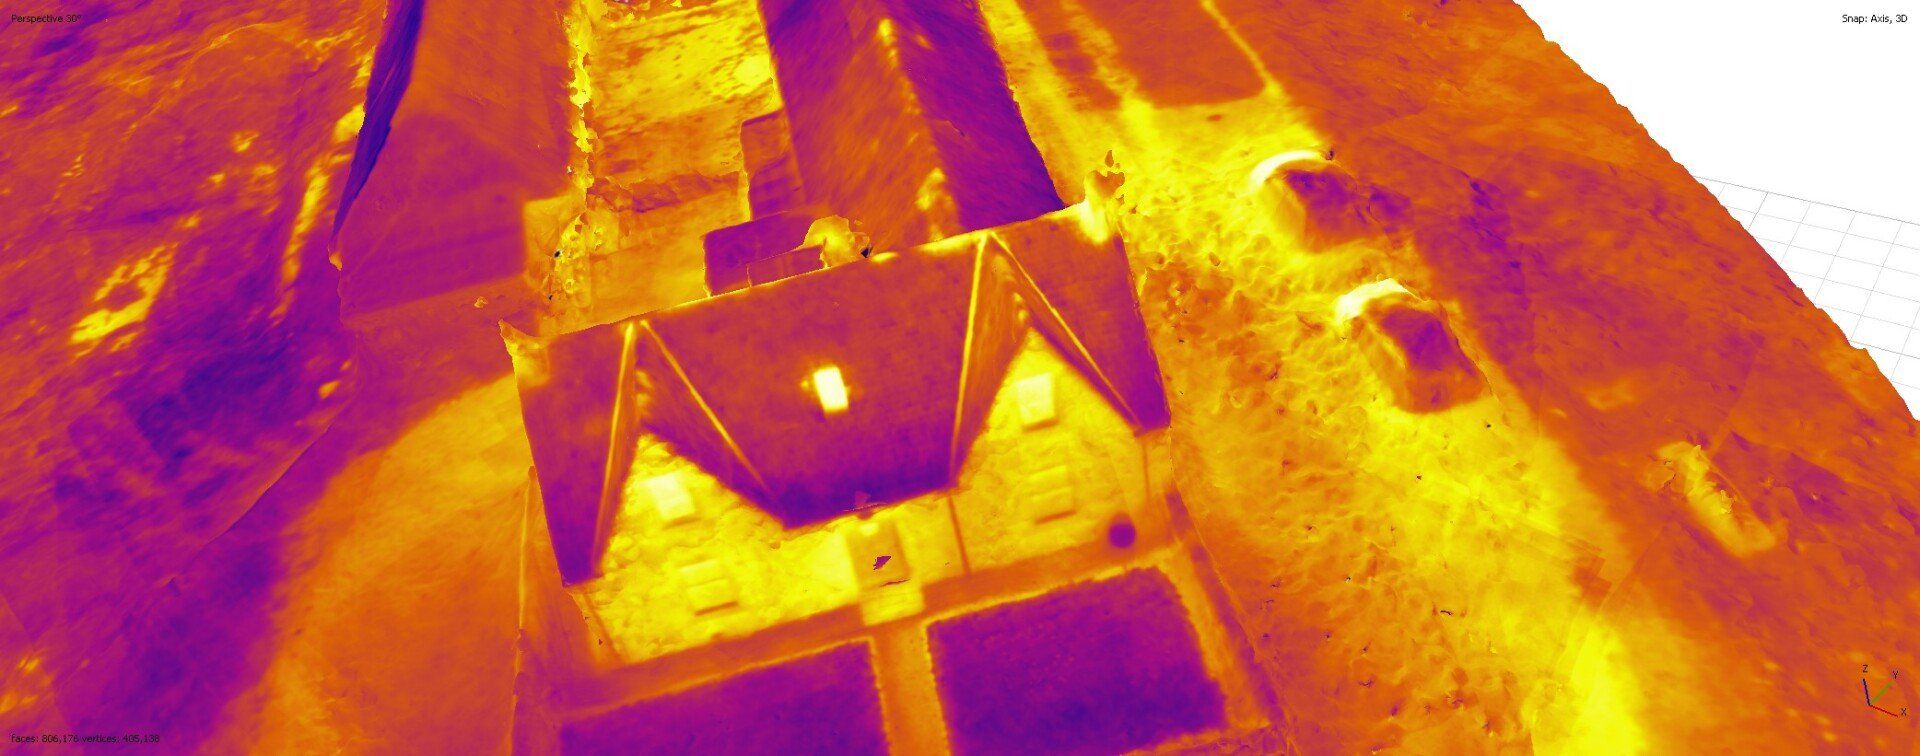 Thermal survey of historic buildings